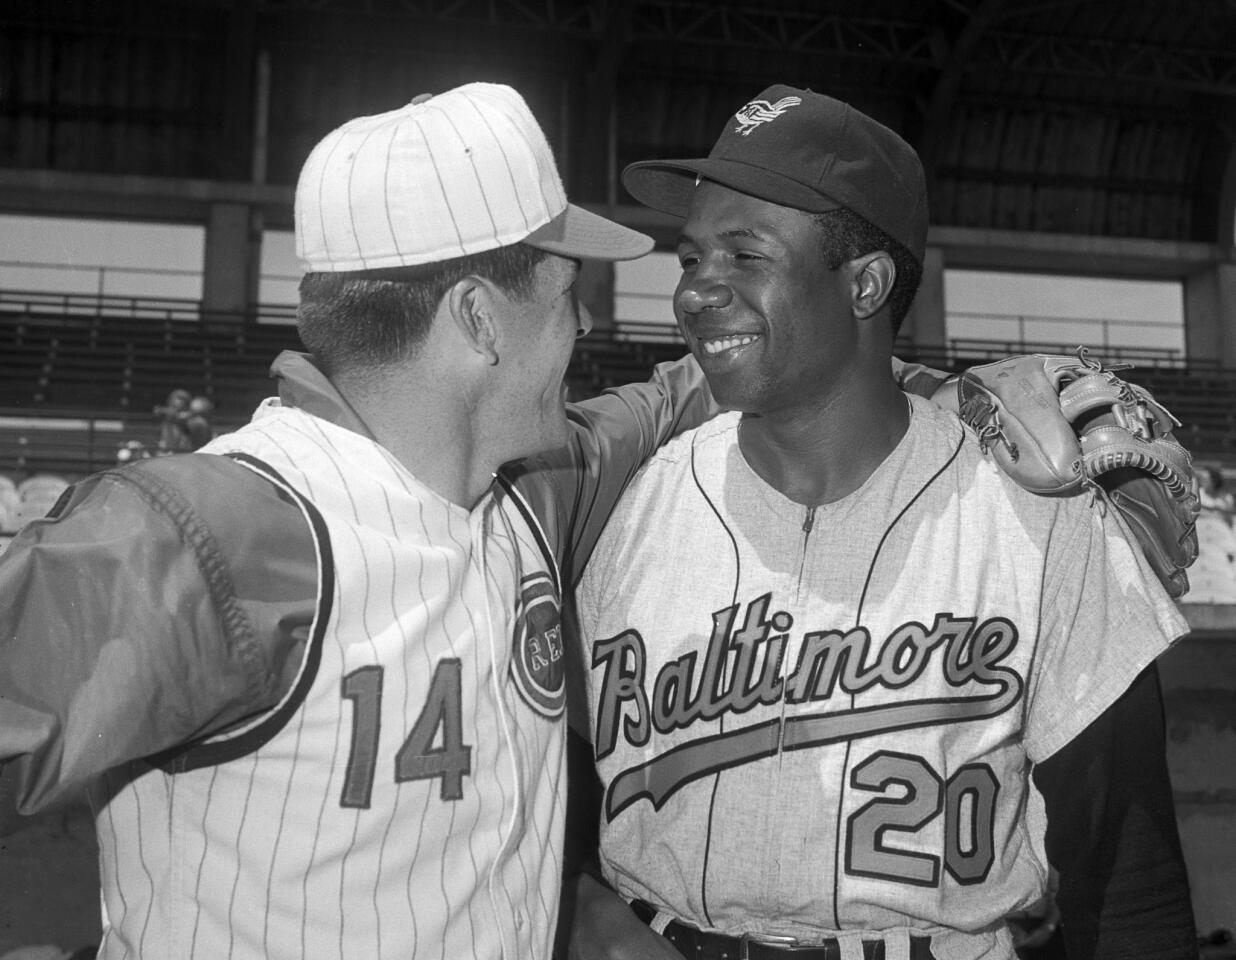 The Cincinnati Reds' Pete Rose, left, greets Frank Robinson of the Orioles before a spring training game, in Tampa, Fla., on April 1, 1966.